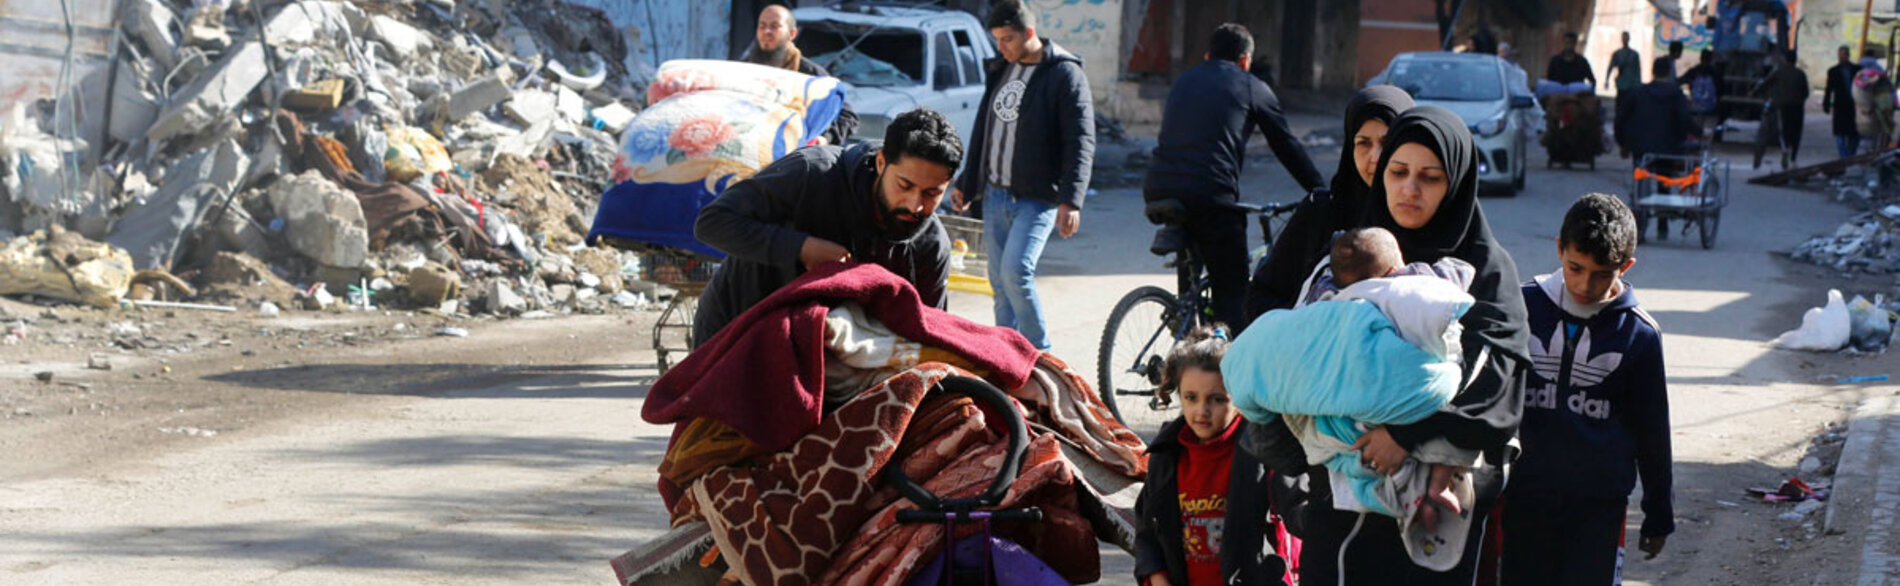 An estimated 100,000 people have moved over the past days to Rafah, already the most densely populated area in Gaza. Their movement, often a repeated displacement, followed the intensification of hostilities in Khan Younis and Deir Al Balah as well as orders by the Israeli military to evacuate certain areas. Photo by UNRWA